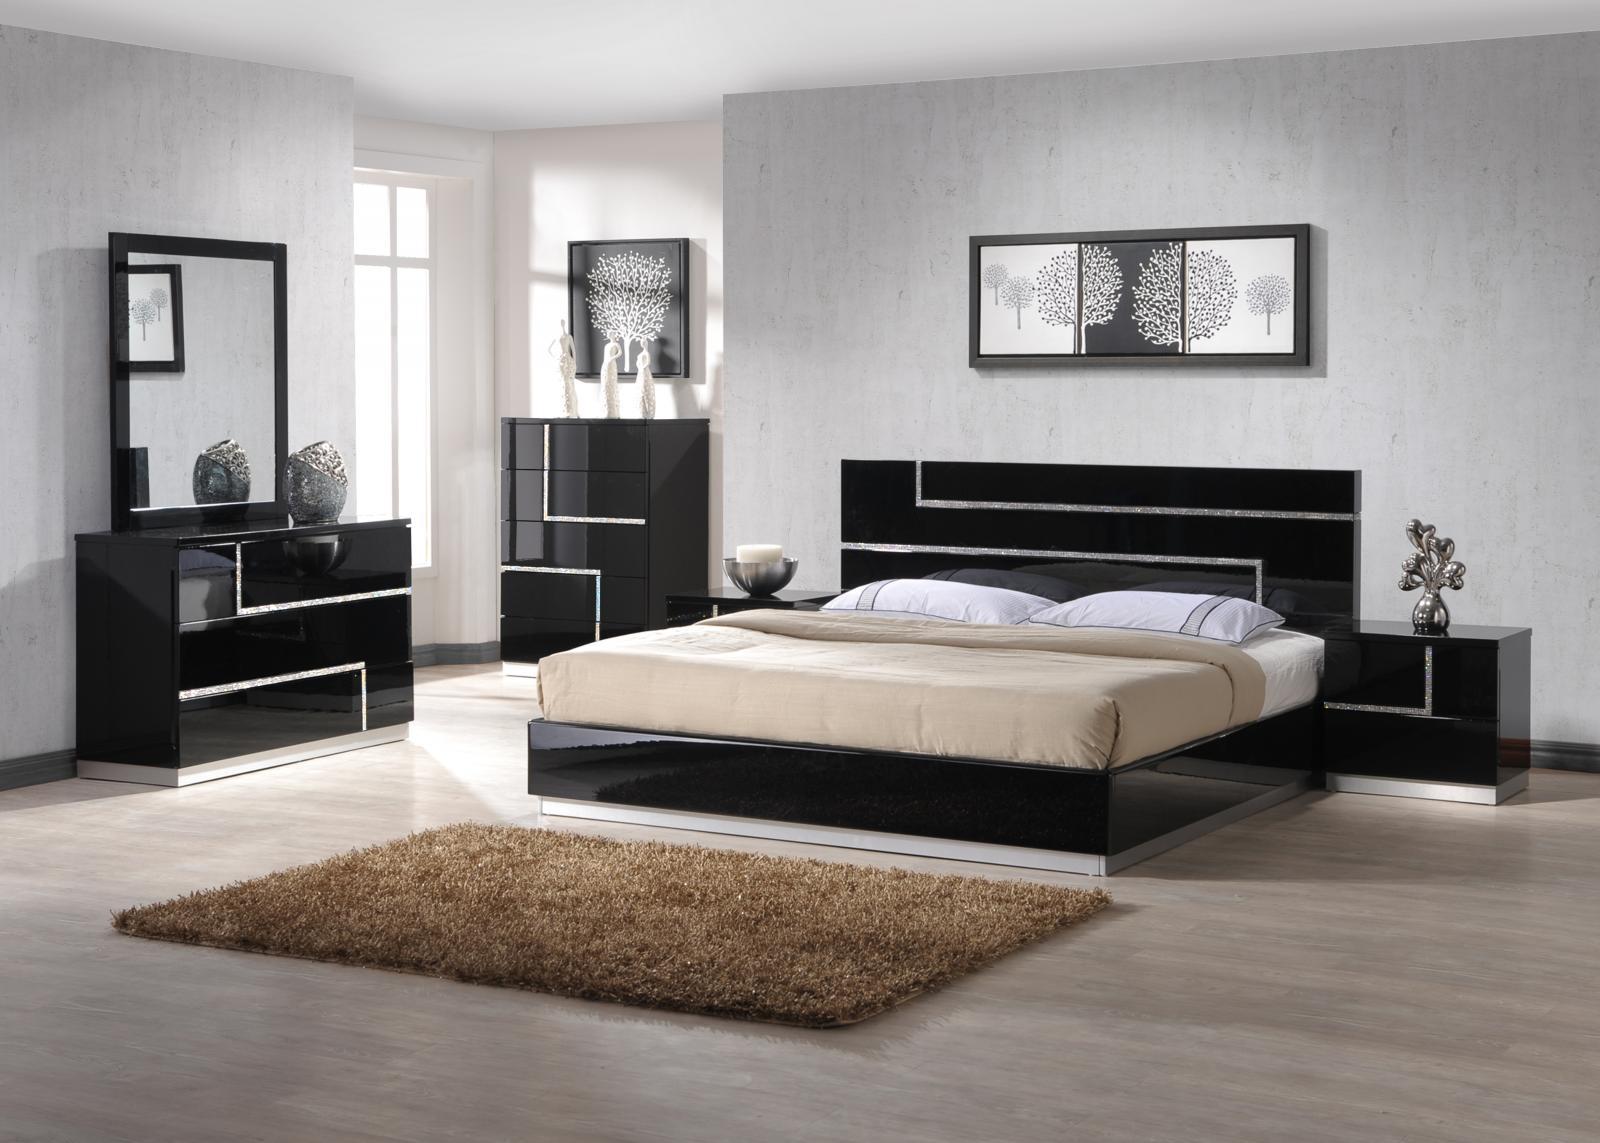 

    
Luxury Black Lacquer With Crystal Accents King Bedroom Set 5Pc Modern J&M Lucca
